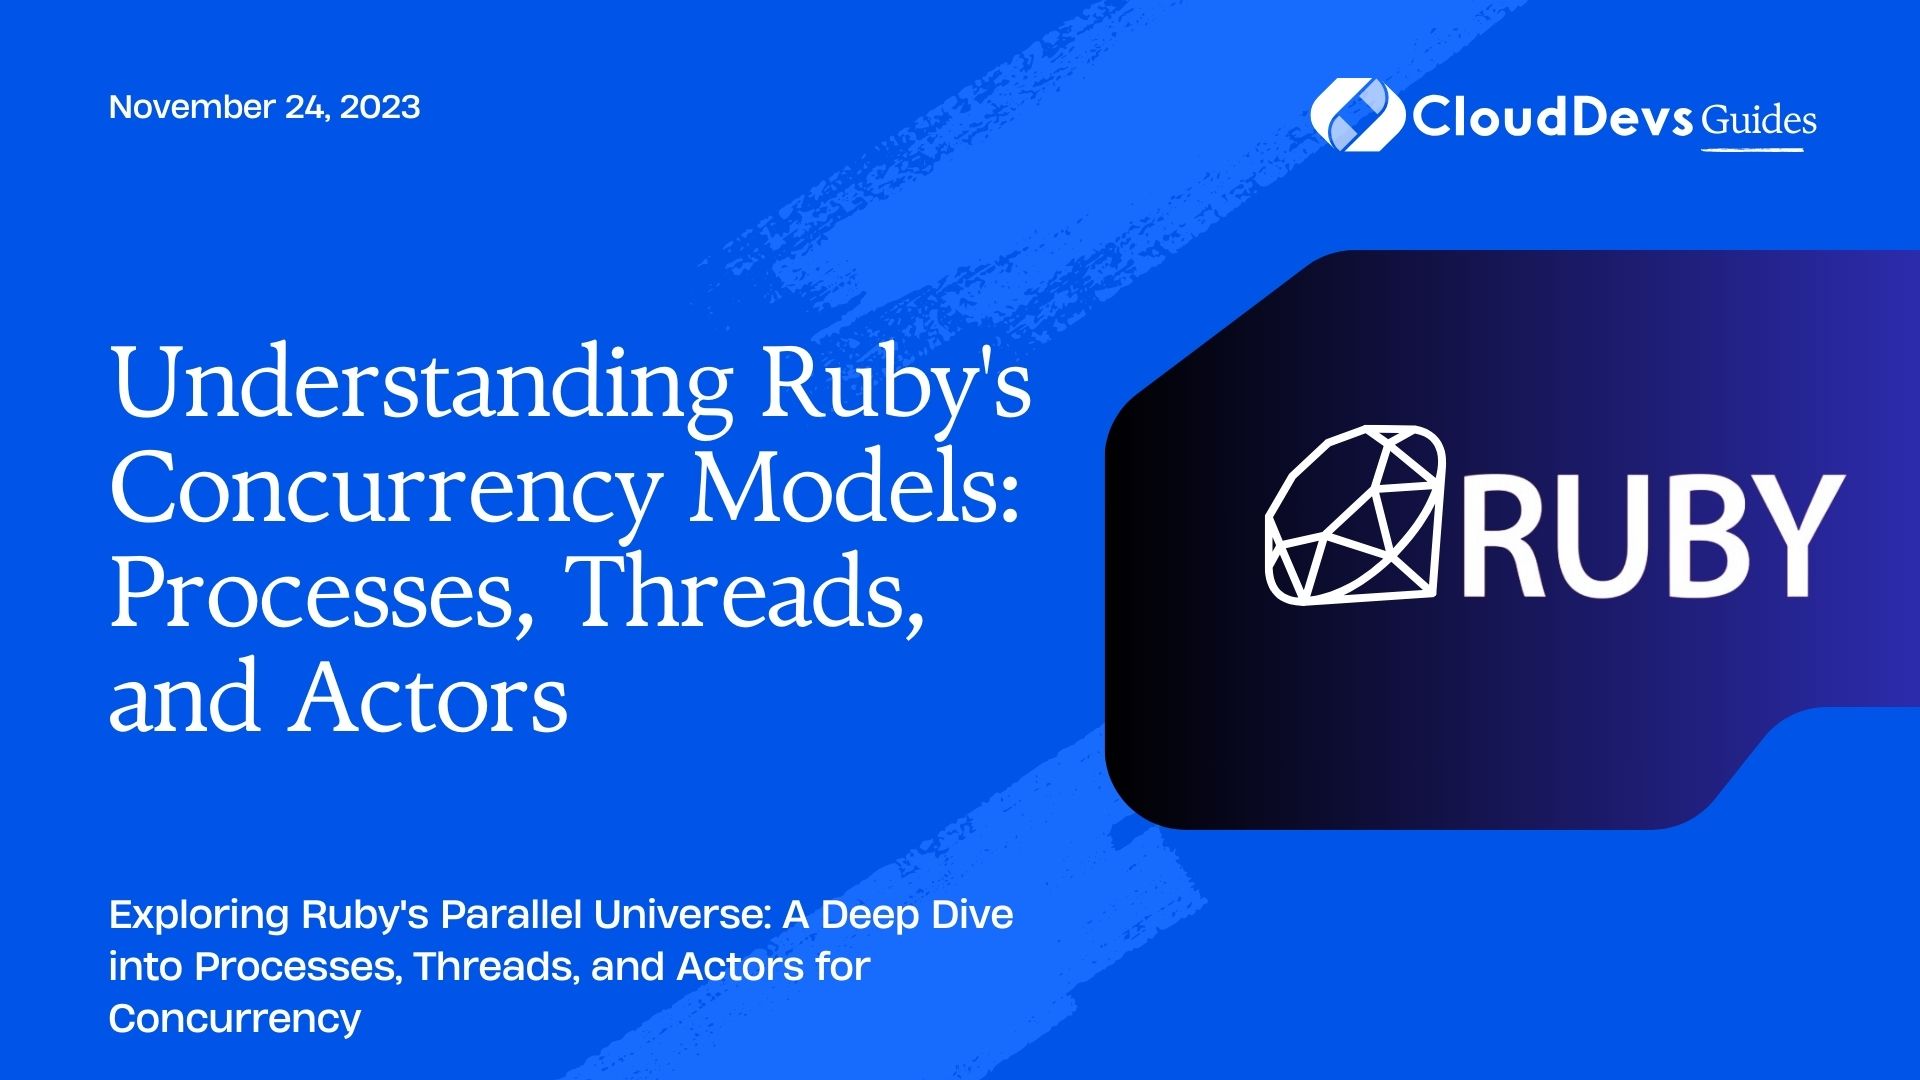 Understanding Ruby's Concurrency Models: Processes, Threads, and Actors